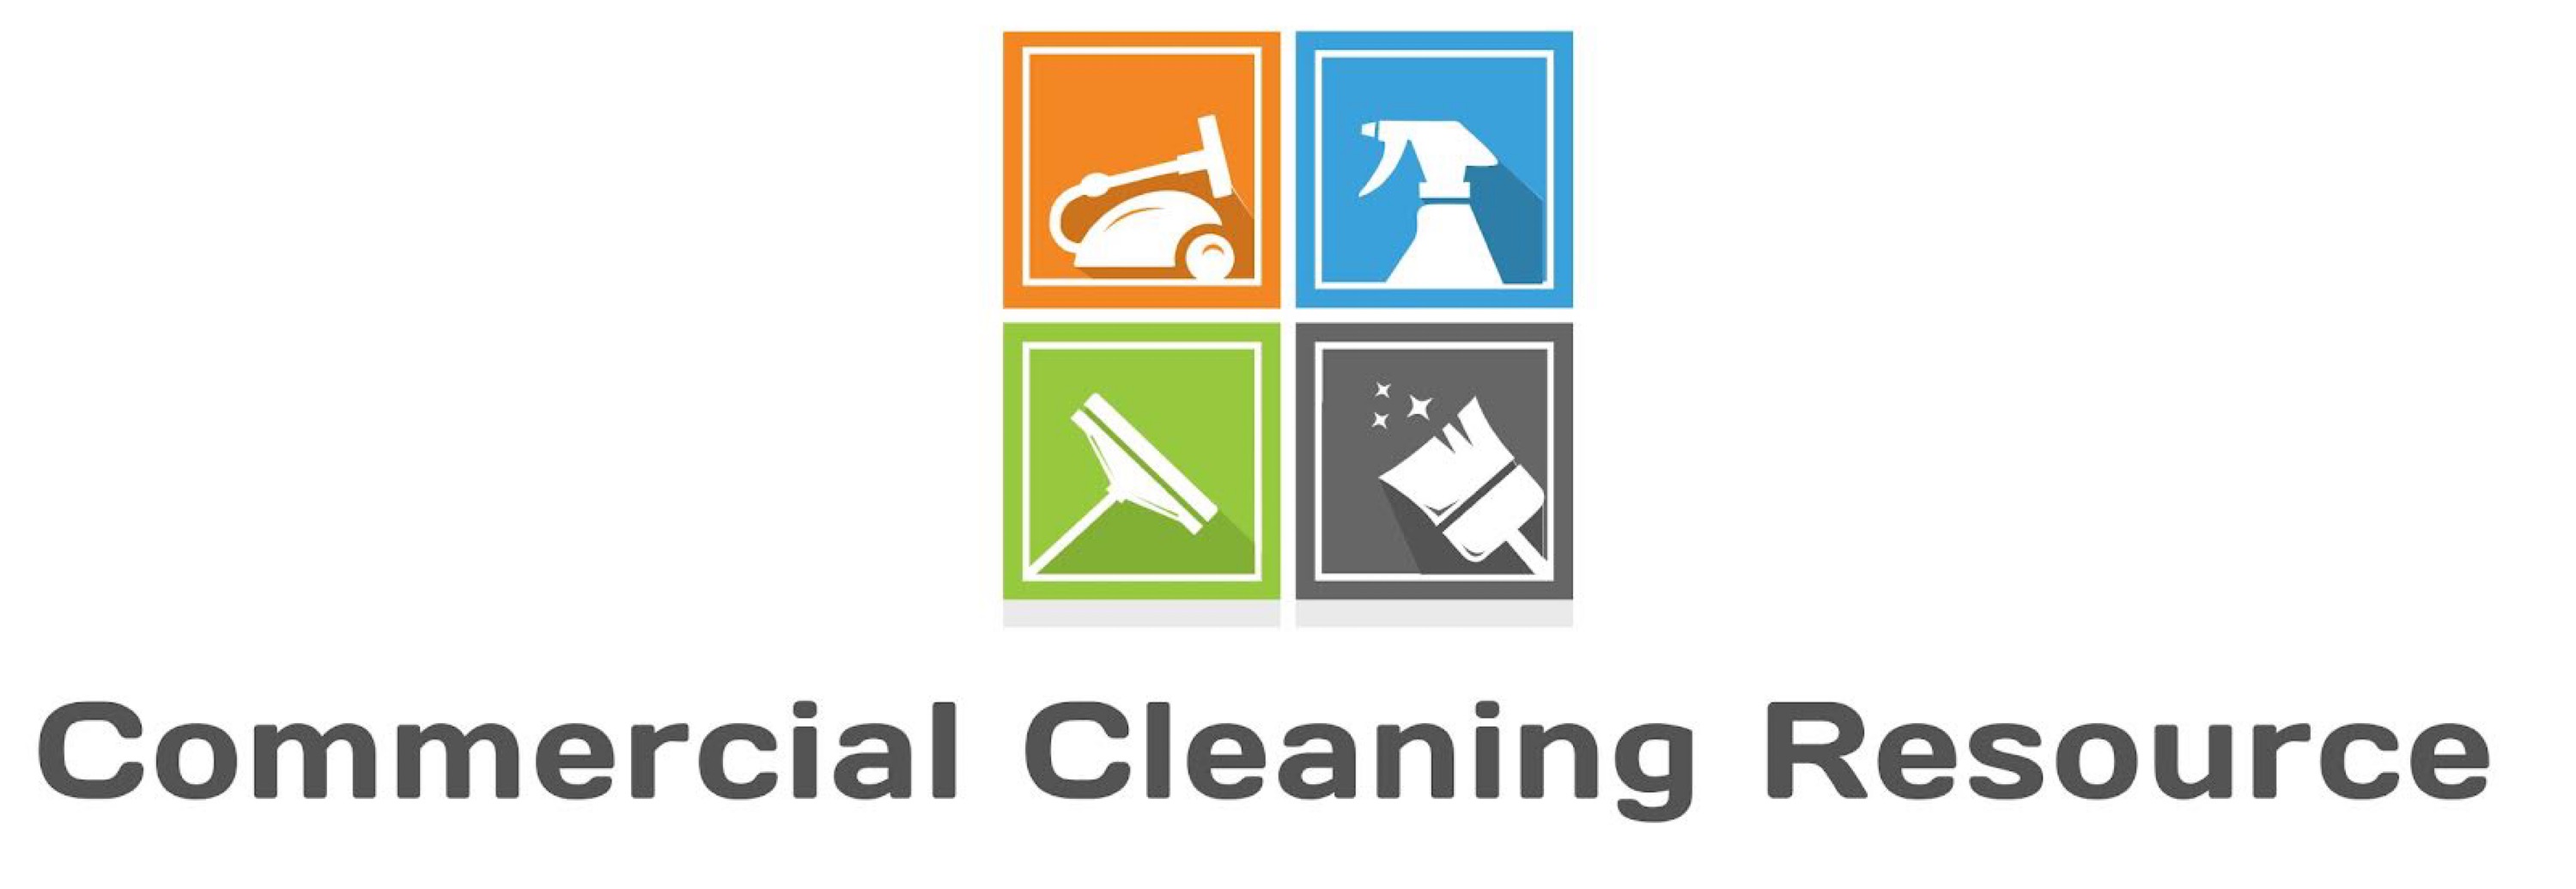 Commercial Cleaning Resource LLC Logo